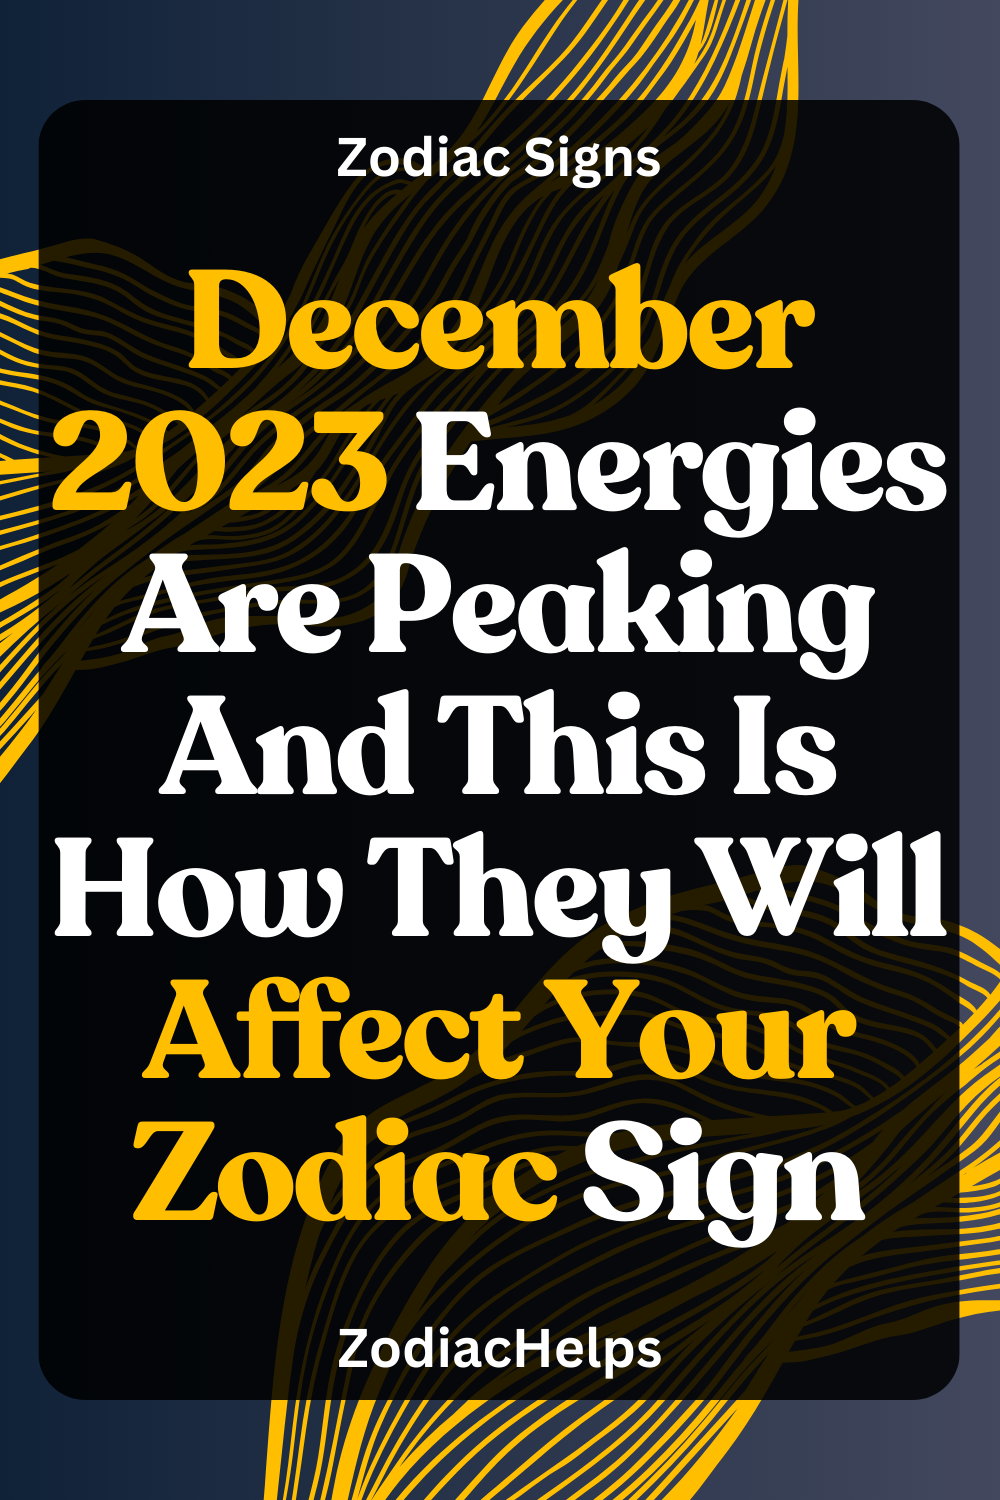 December 2023 Energies Are Peaking And This Is How They Will Affect Your Zodiac Sign